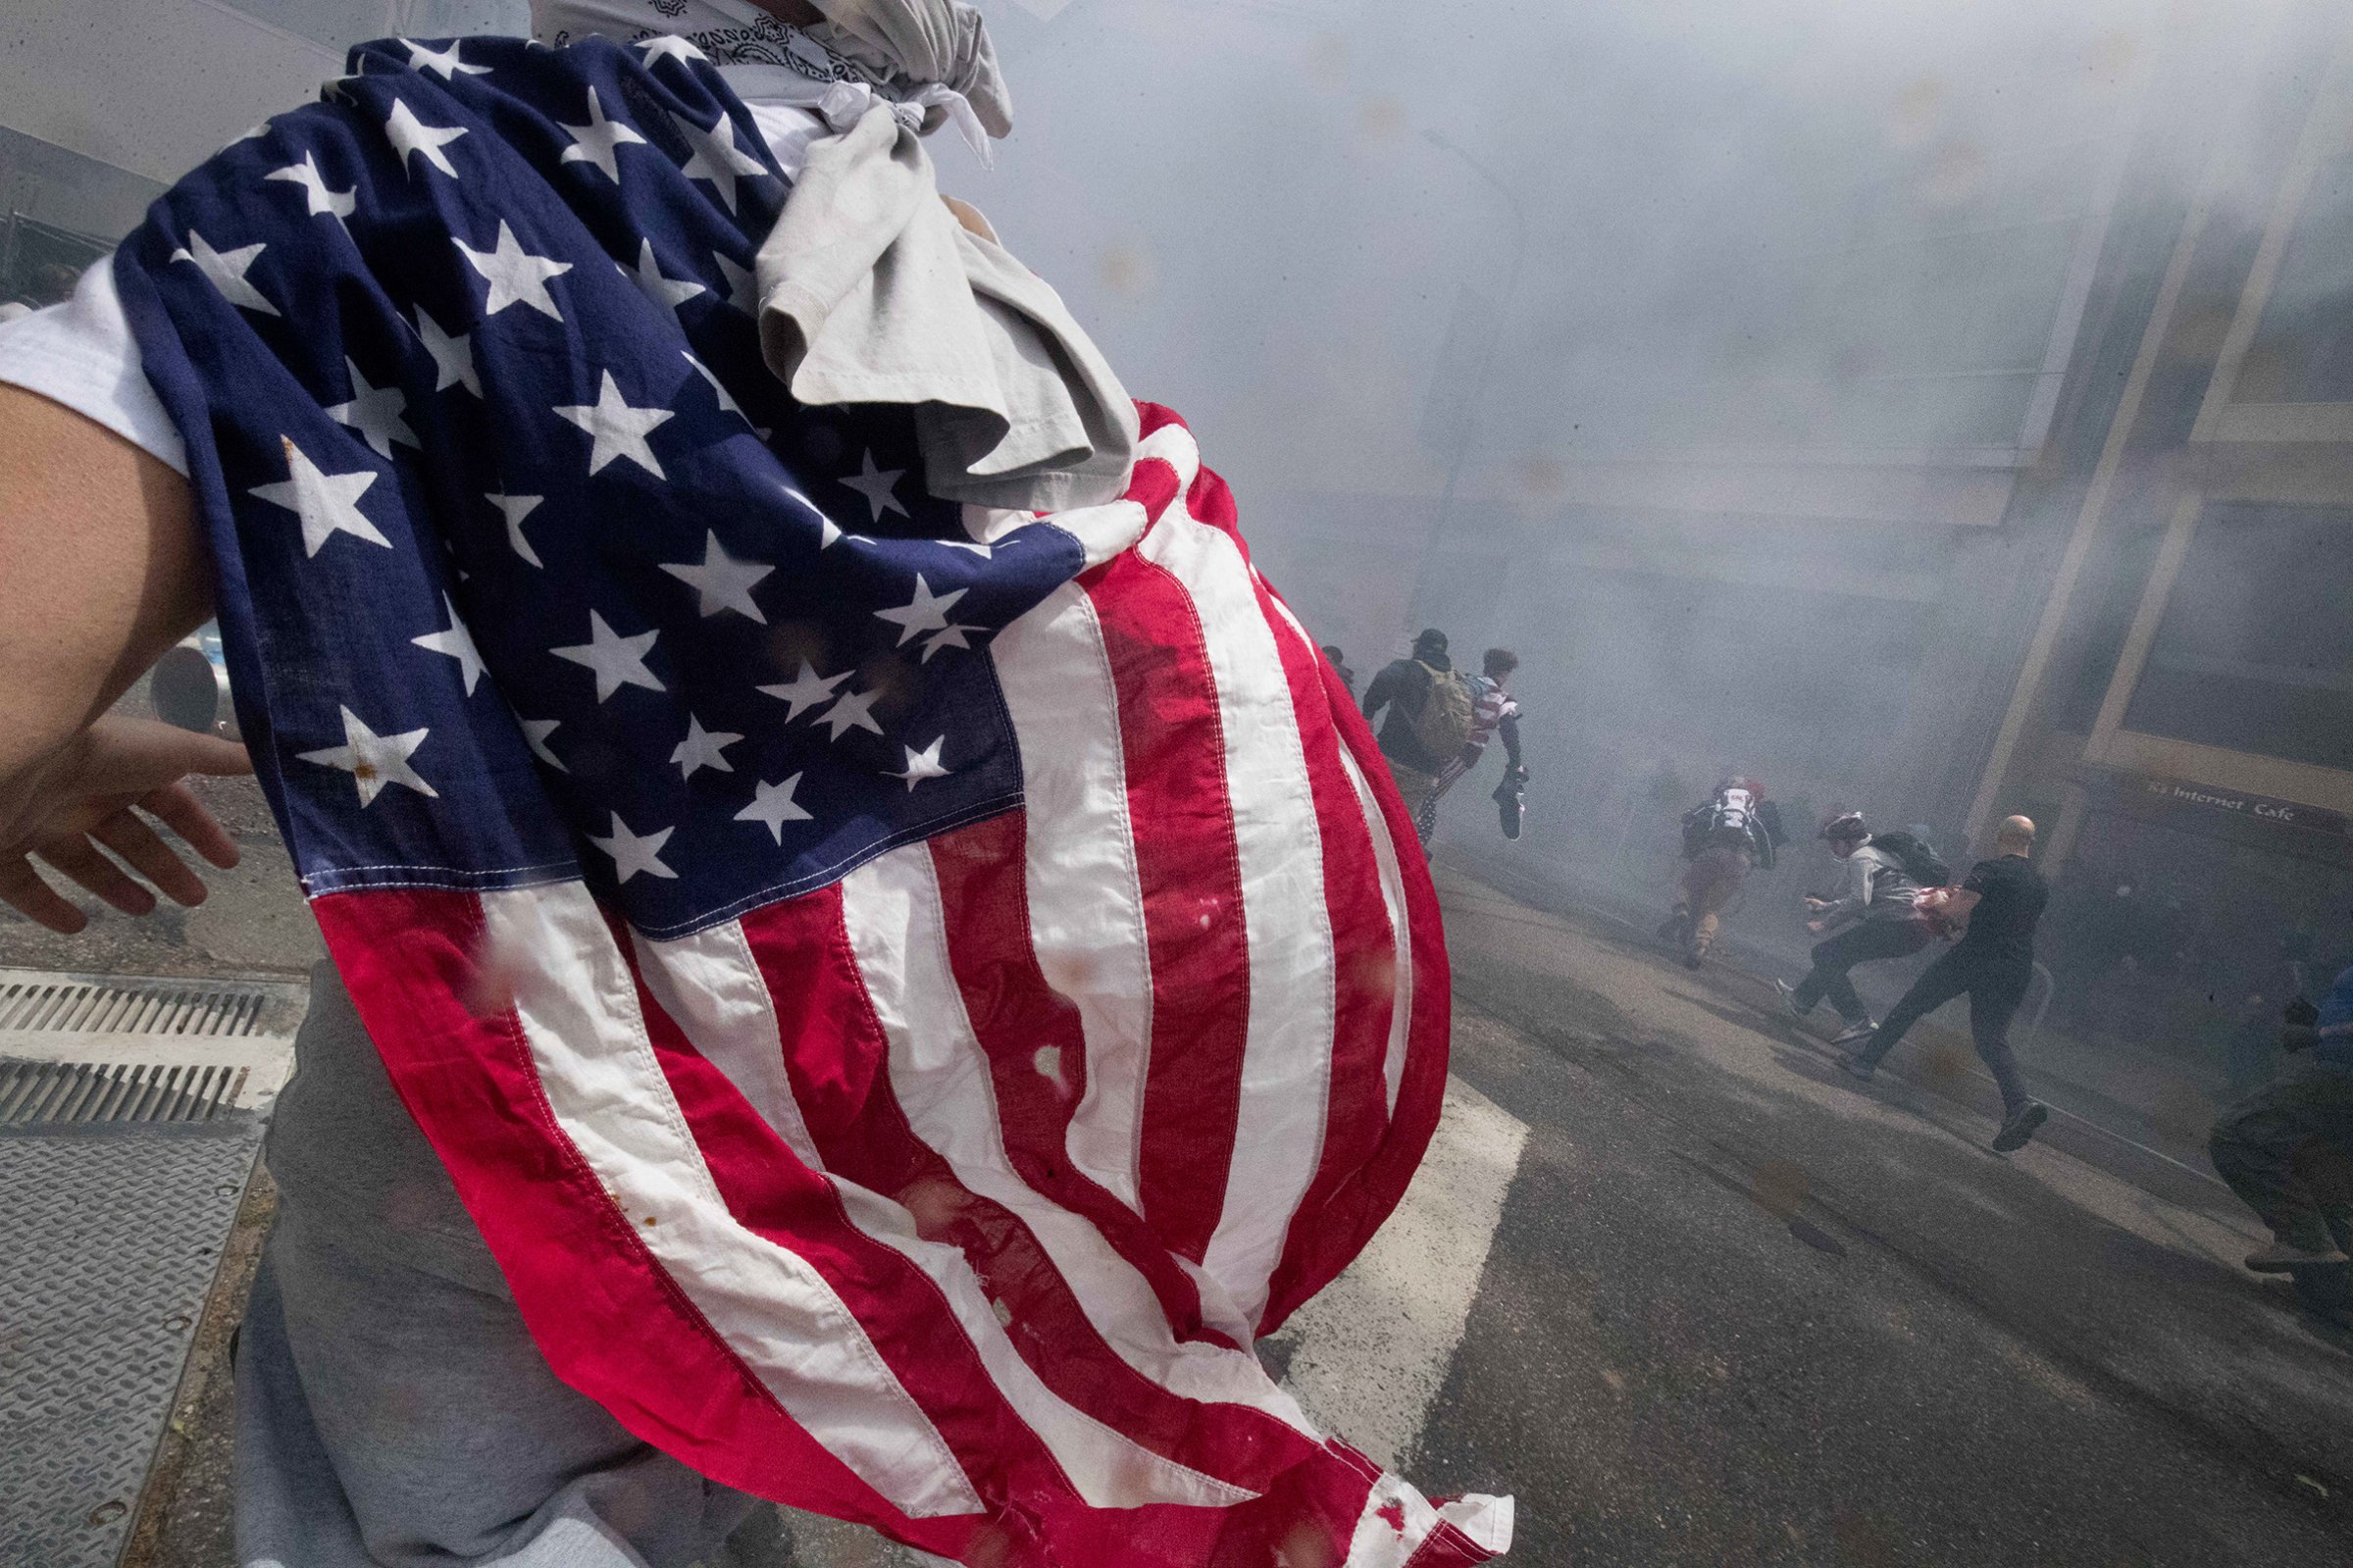 fighting-words-a-battle-berkeley-over-free-speech-shows-how-frenzied-politics-have-become